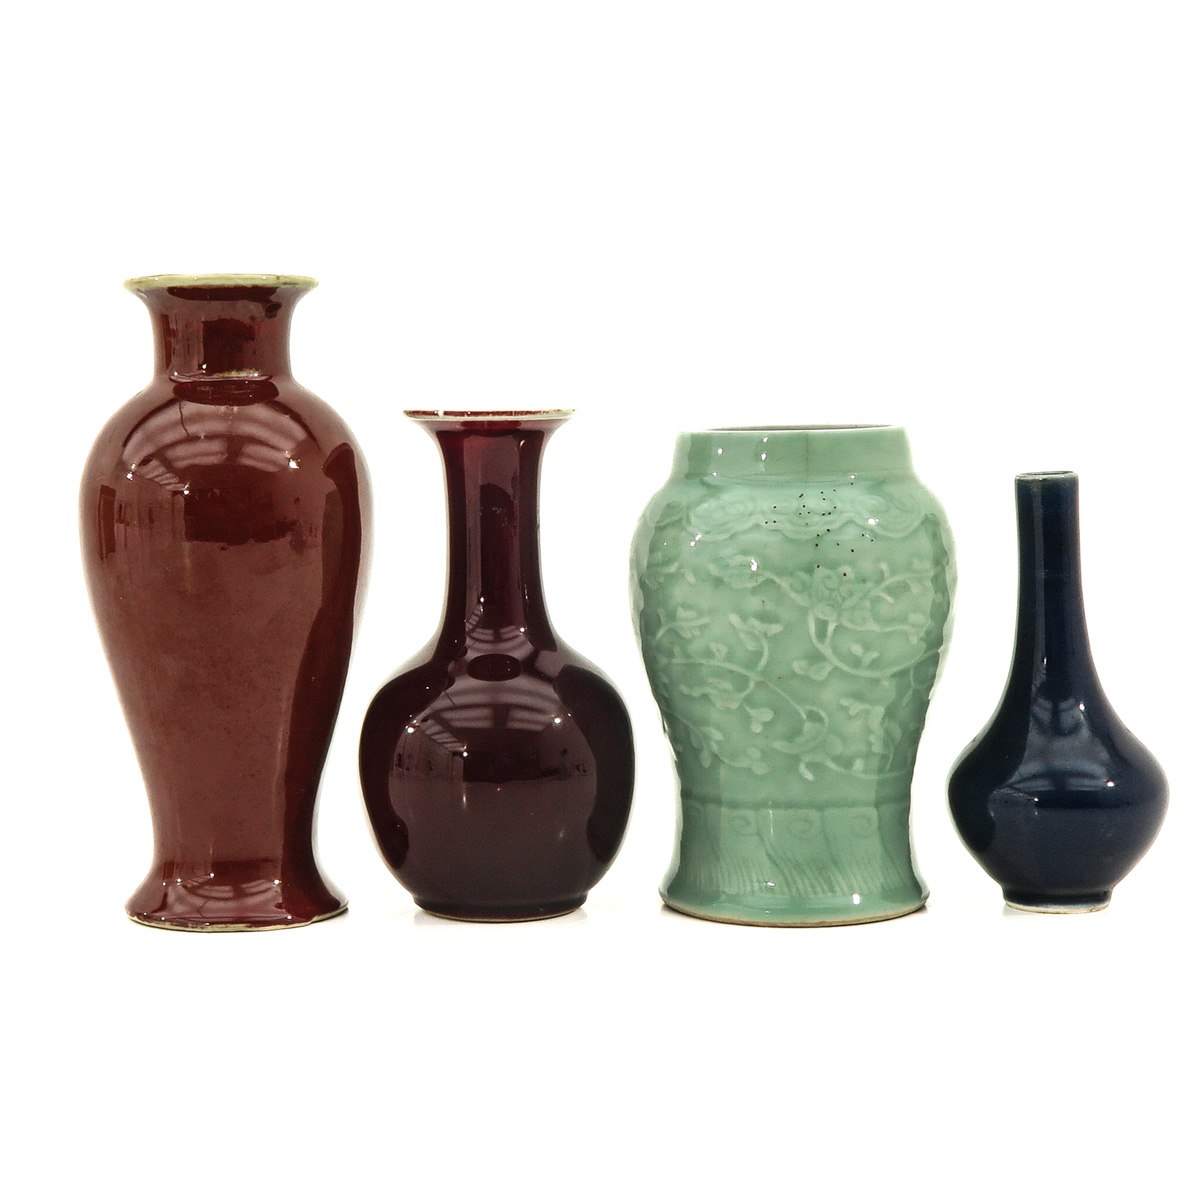 A Collection of 4 Monochrome Decor Vases - Image 2 of 10